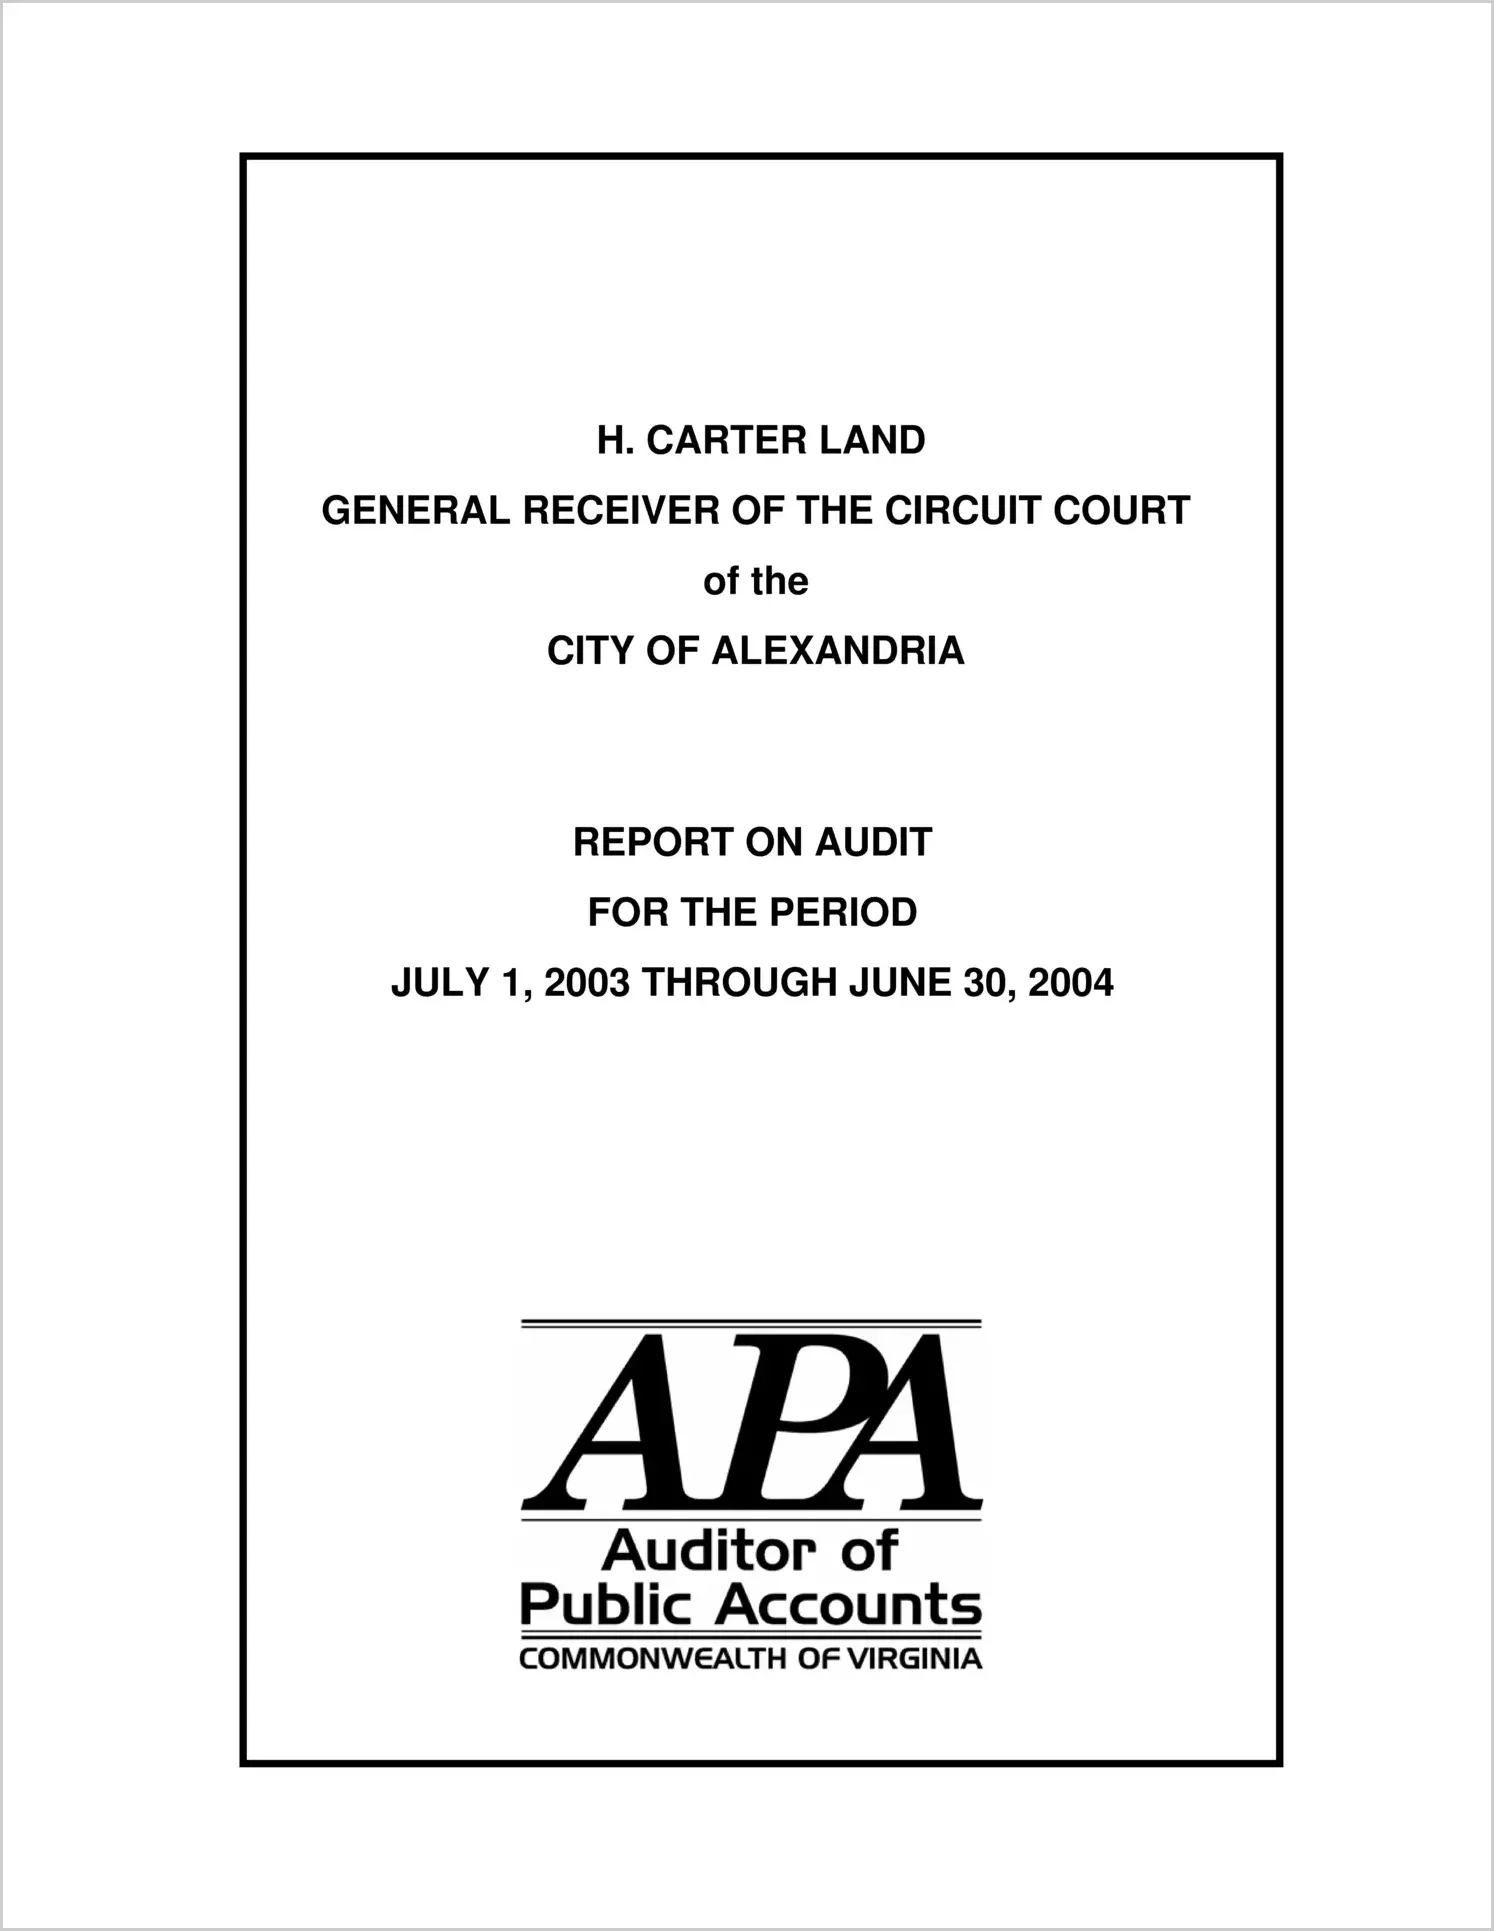 General Receiver of the Circuit Court of the City of Alexandria for the period July 1, 2003  through June 30, 2004